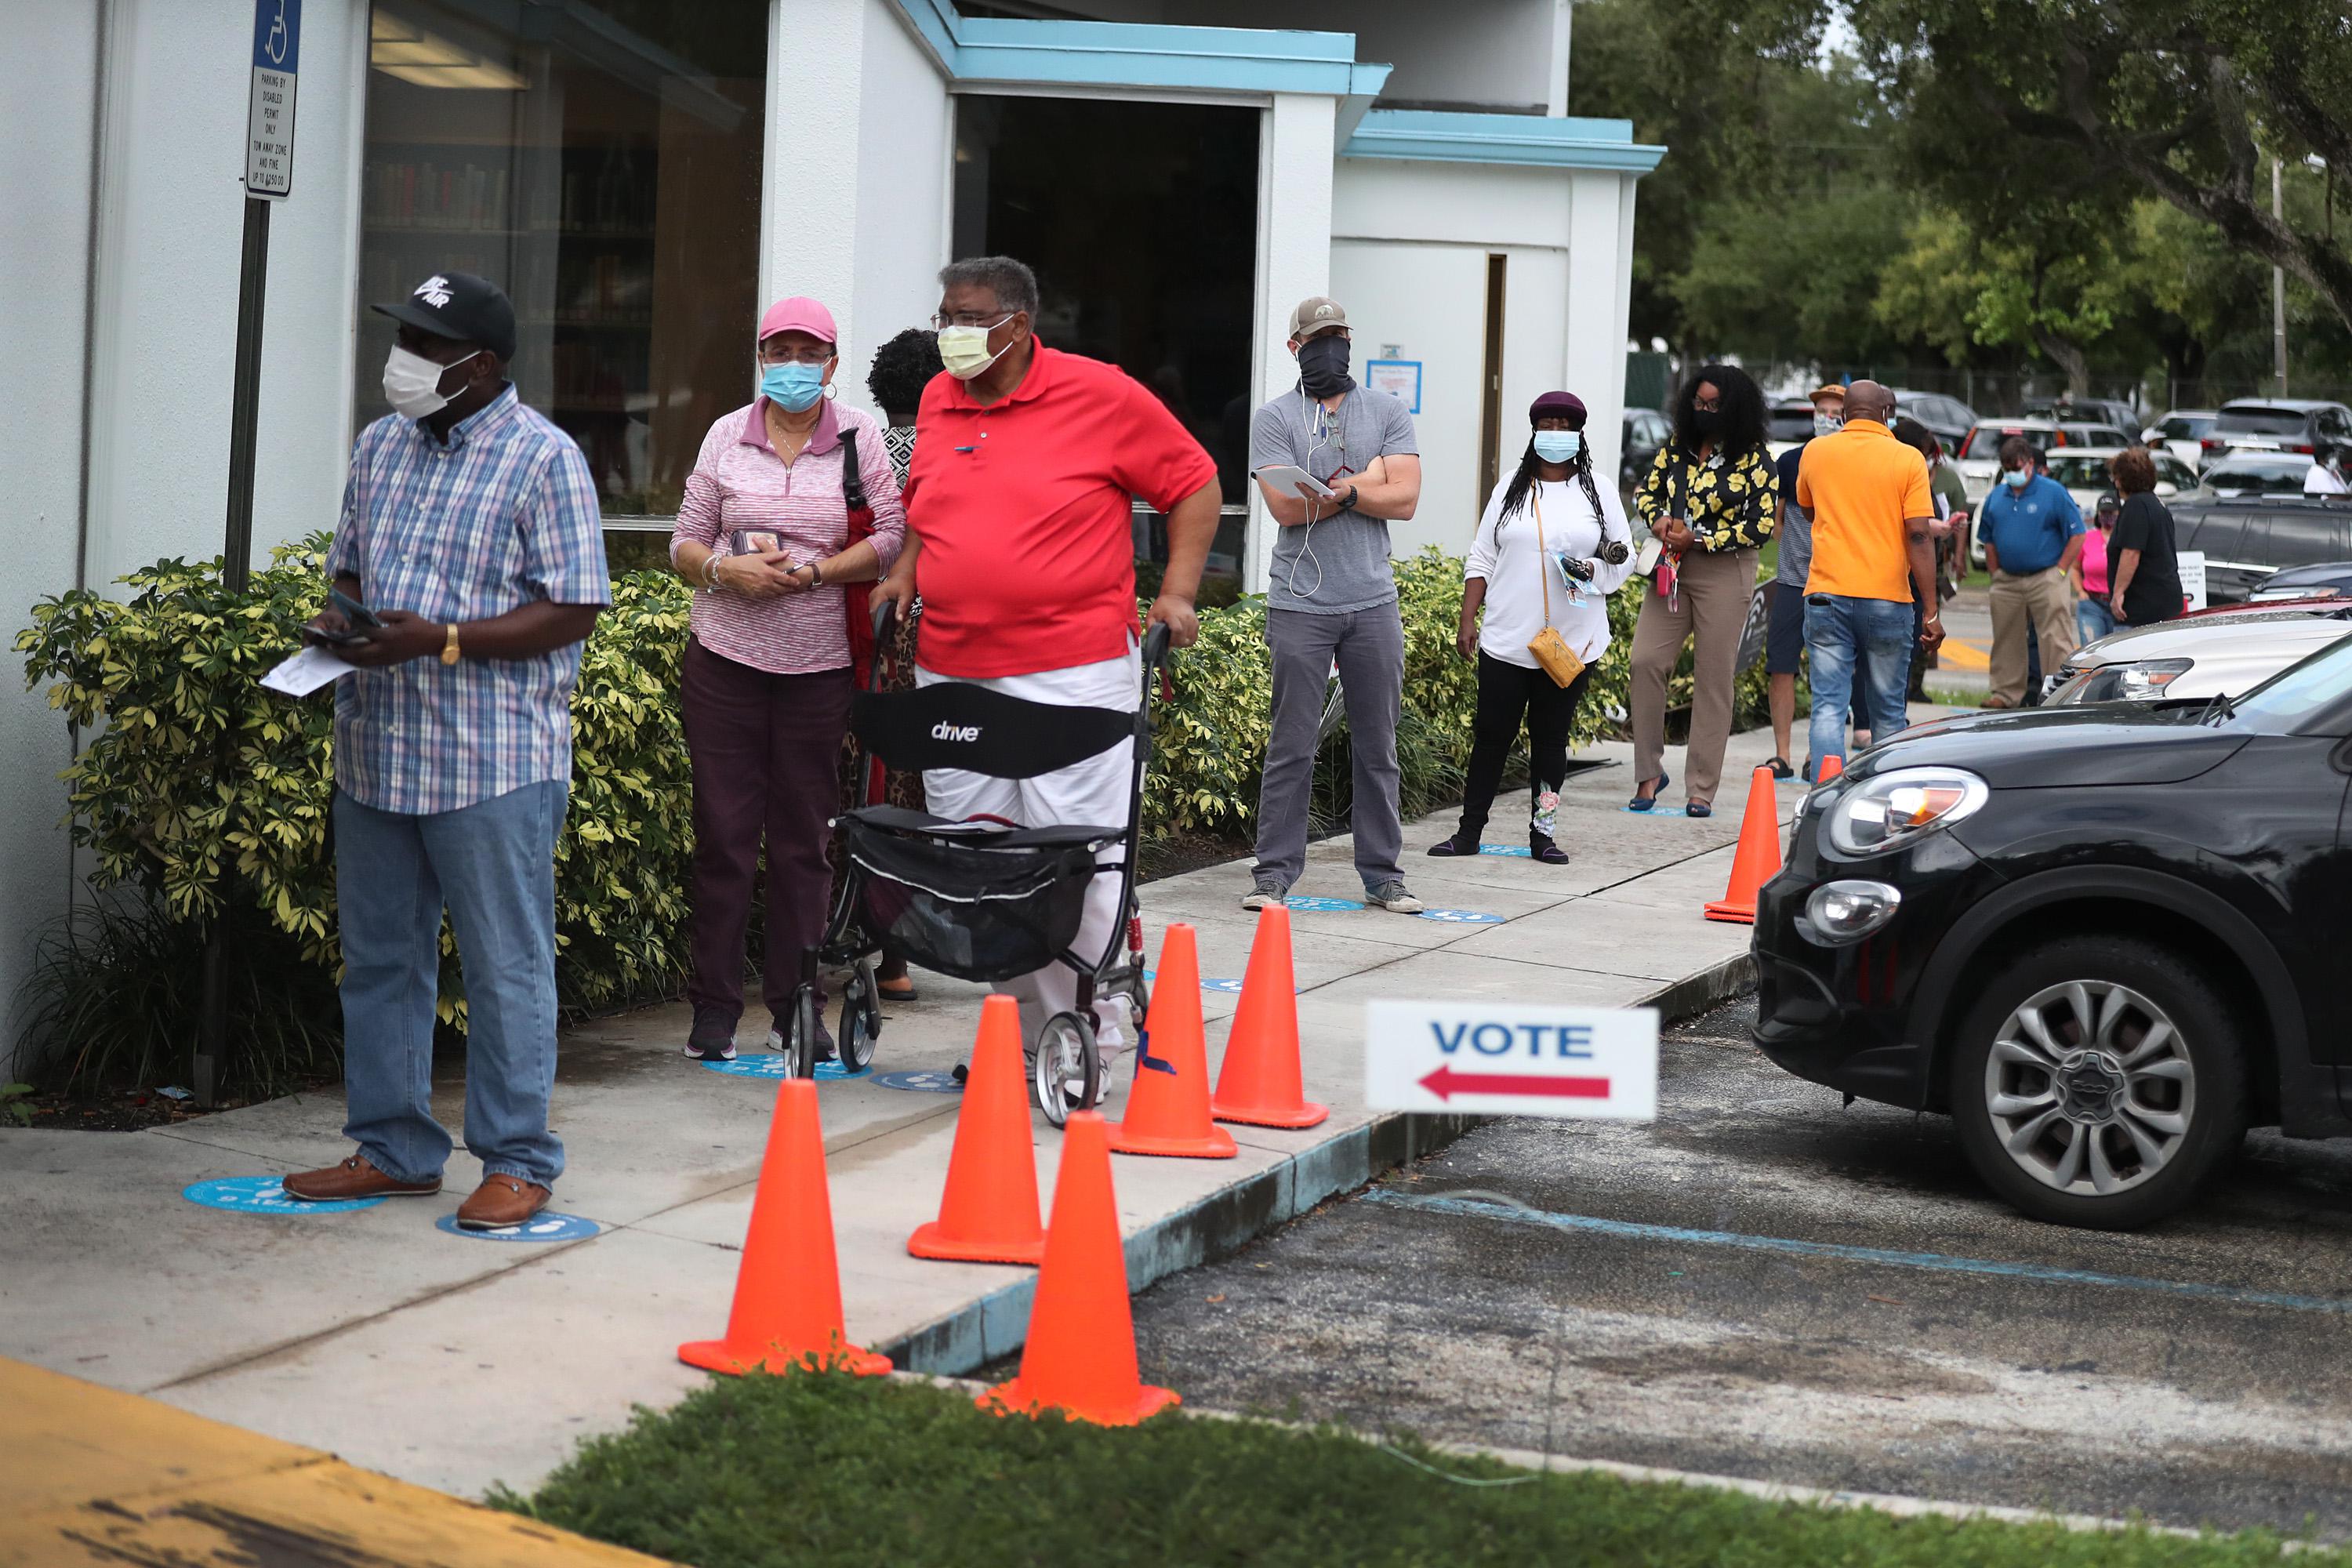 Voters wait in line to cast their early ballots in Miami.